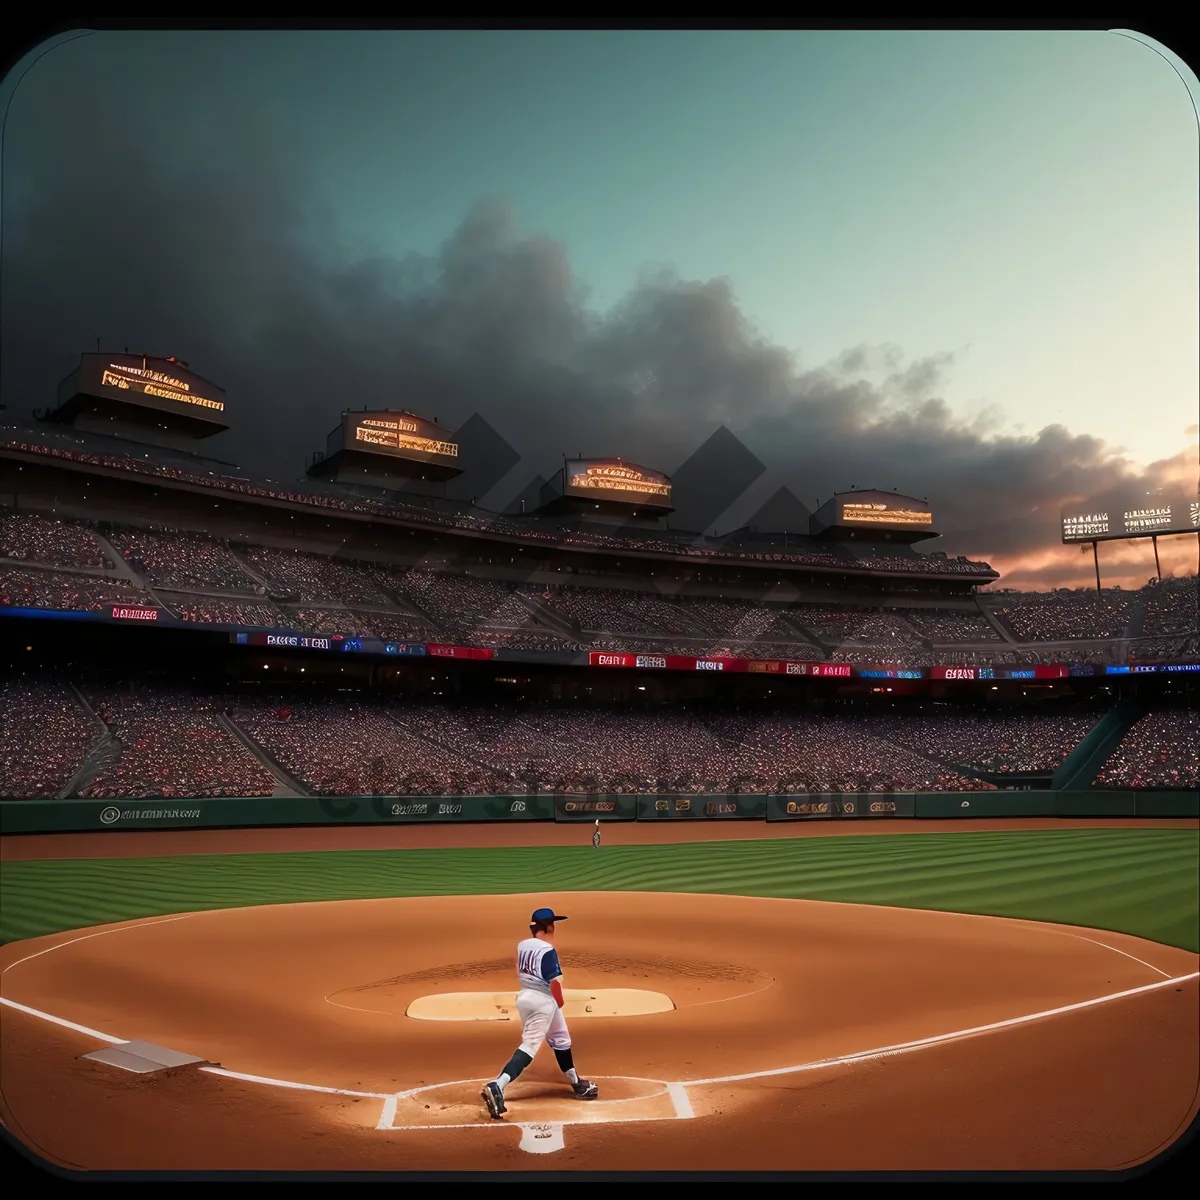 Picture of Sports Field with Baseball Equipment and Stadium Lights